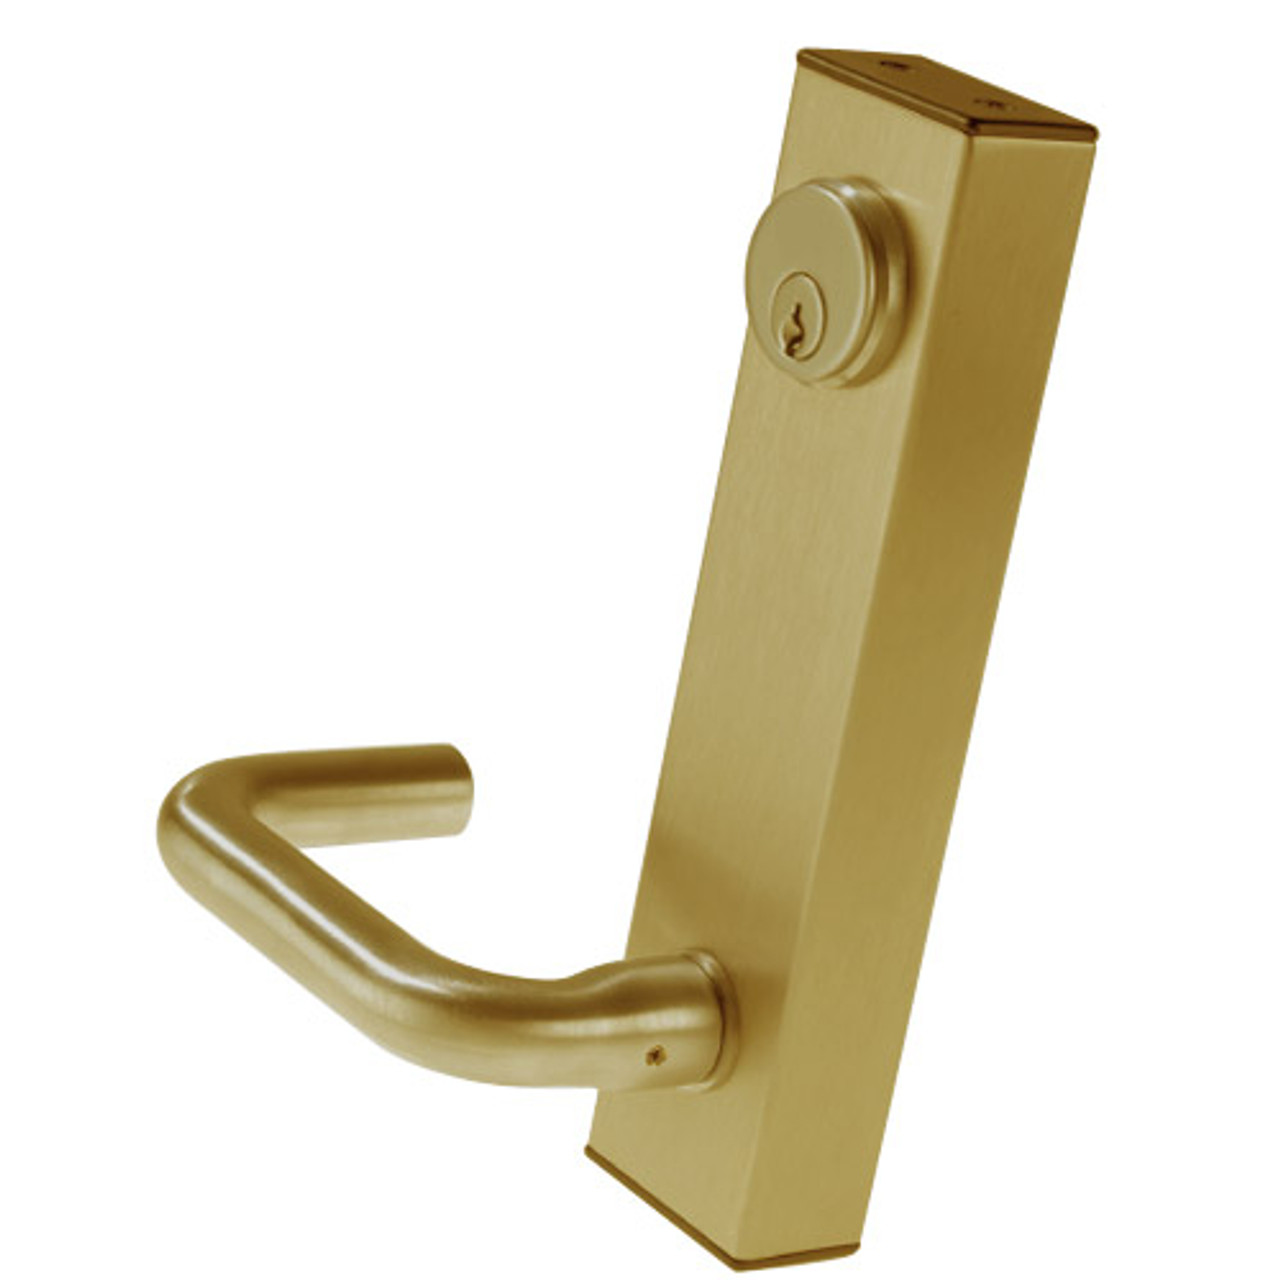 3080E-02-0-37-35 US4 Adams Rite Electrified Entry Trim with Round Lever in Satin Brass Finish